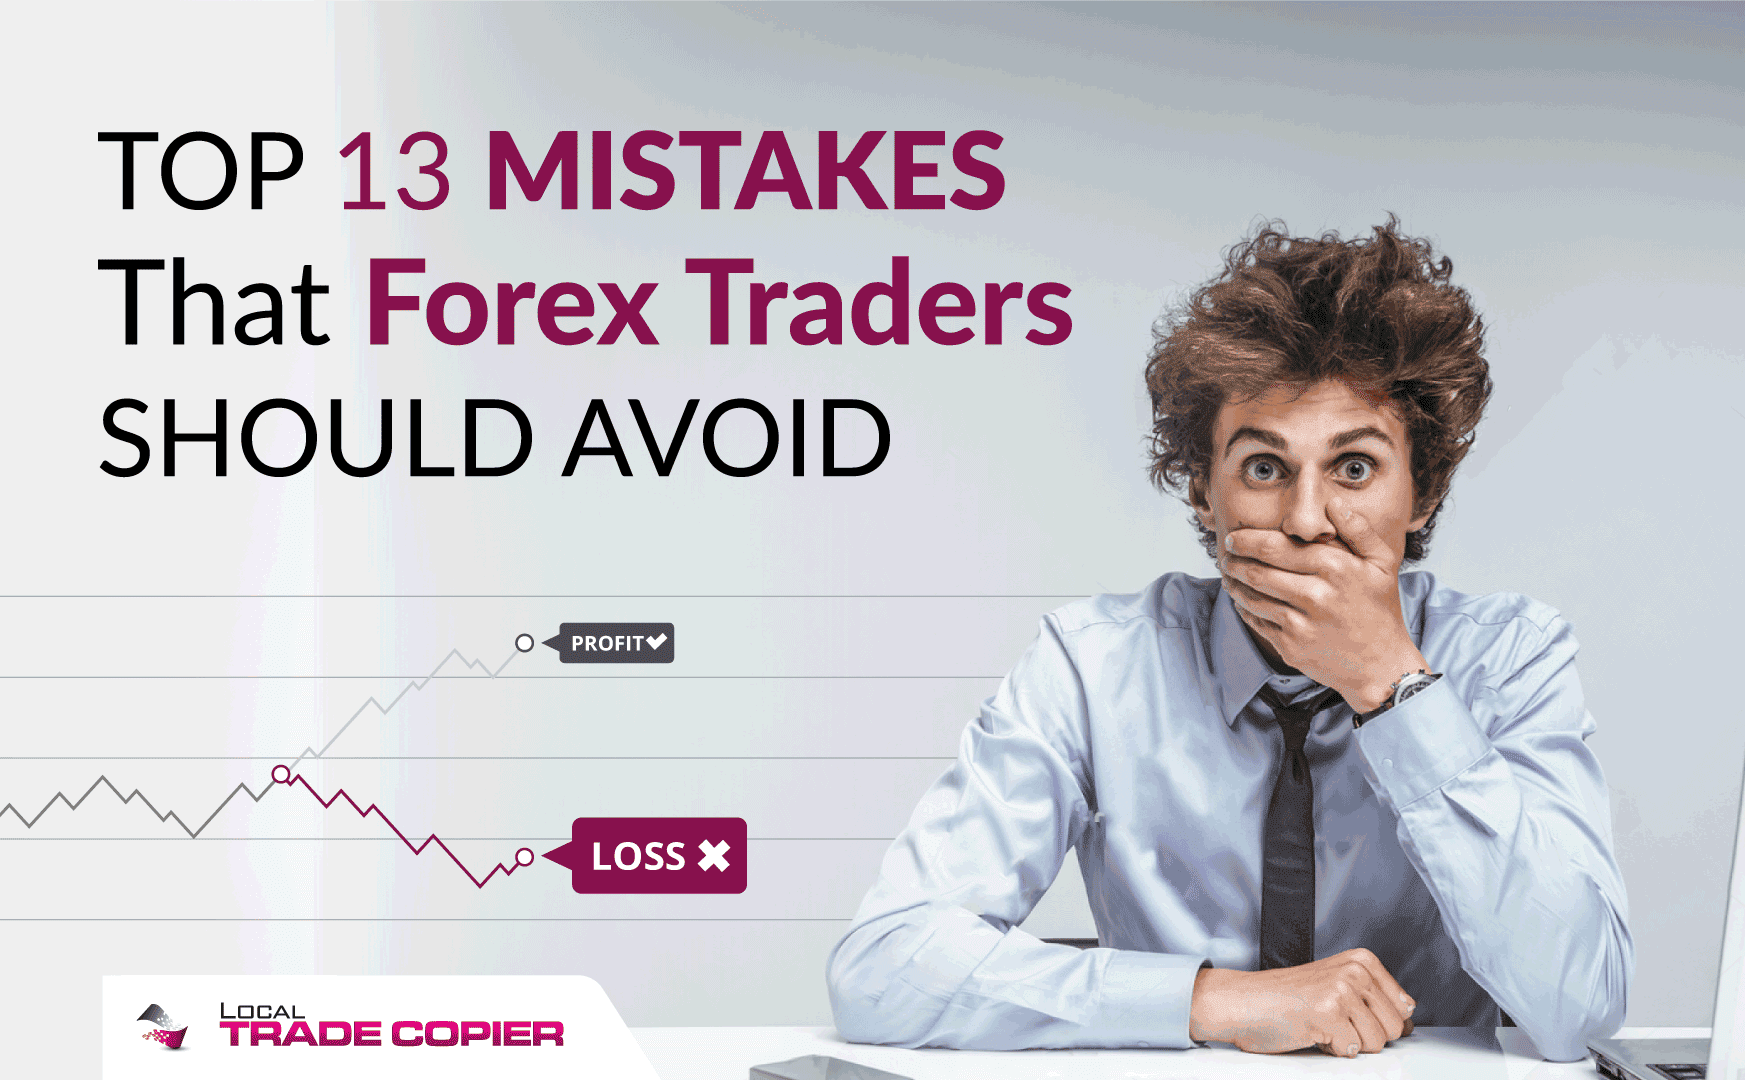 Top 13 Mistakes That Forex Traders Should Avoid